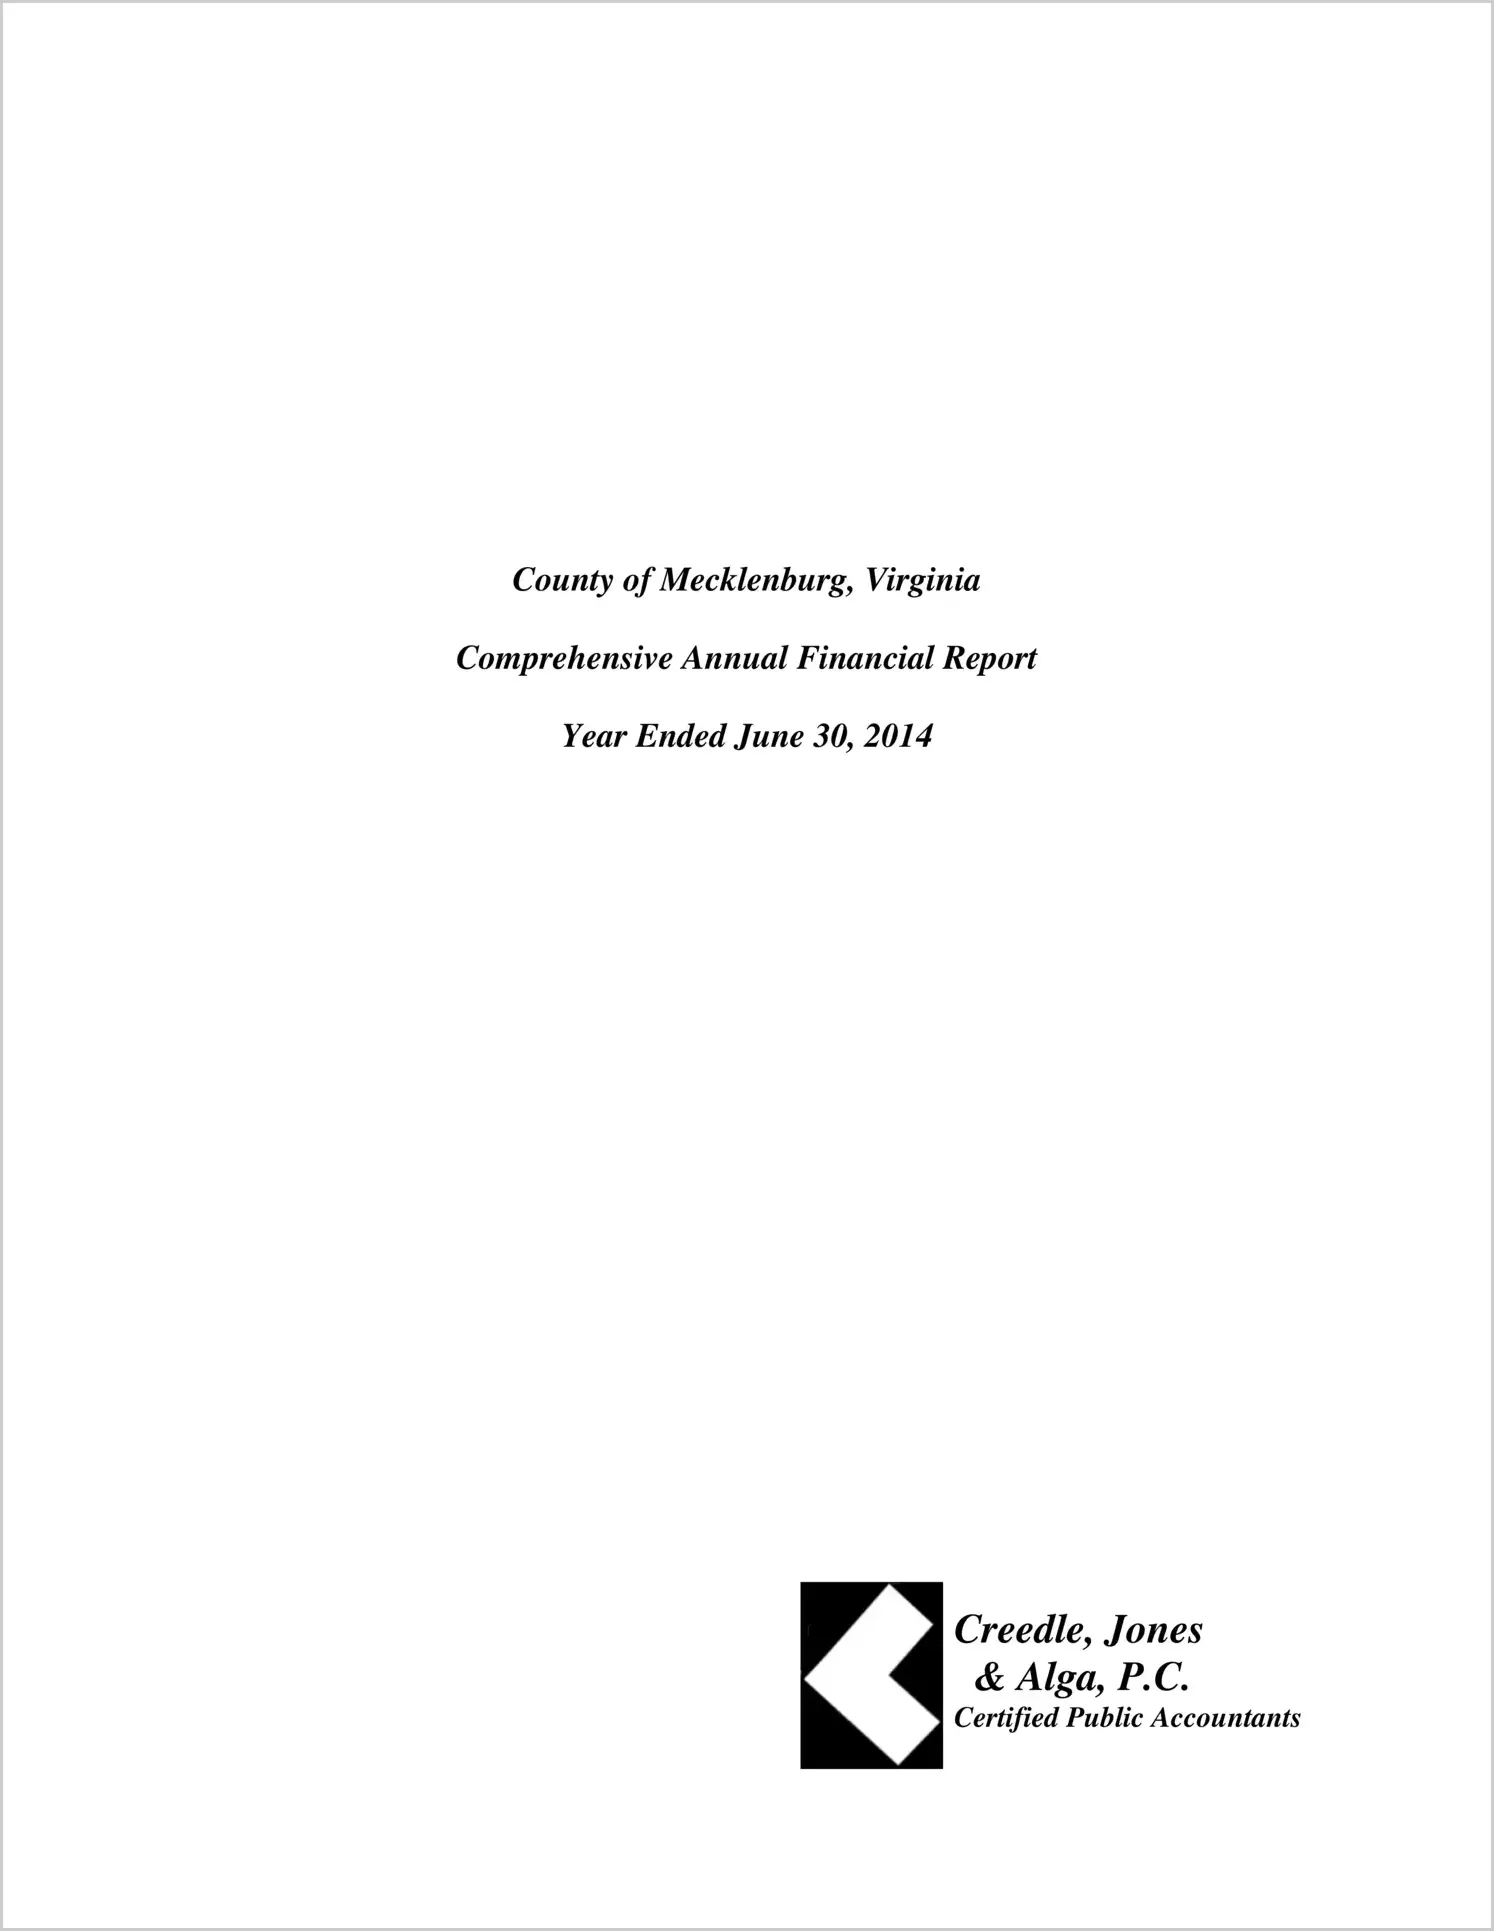 2014 Annual Financial Report for County of Mecklenburg